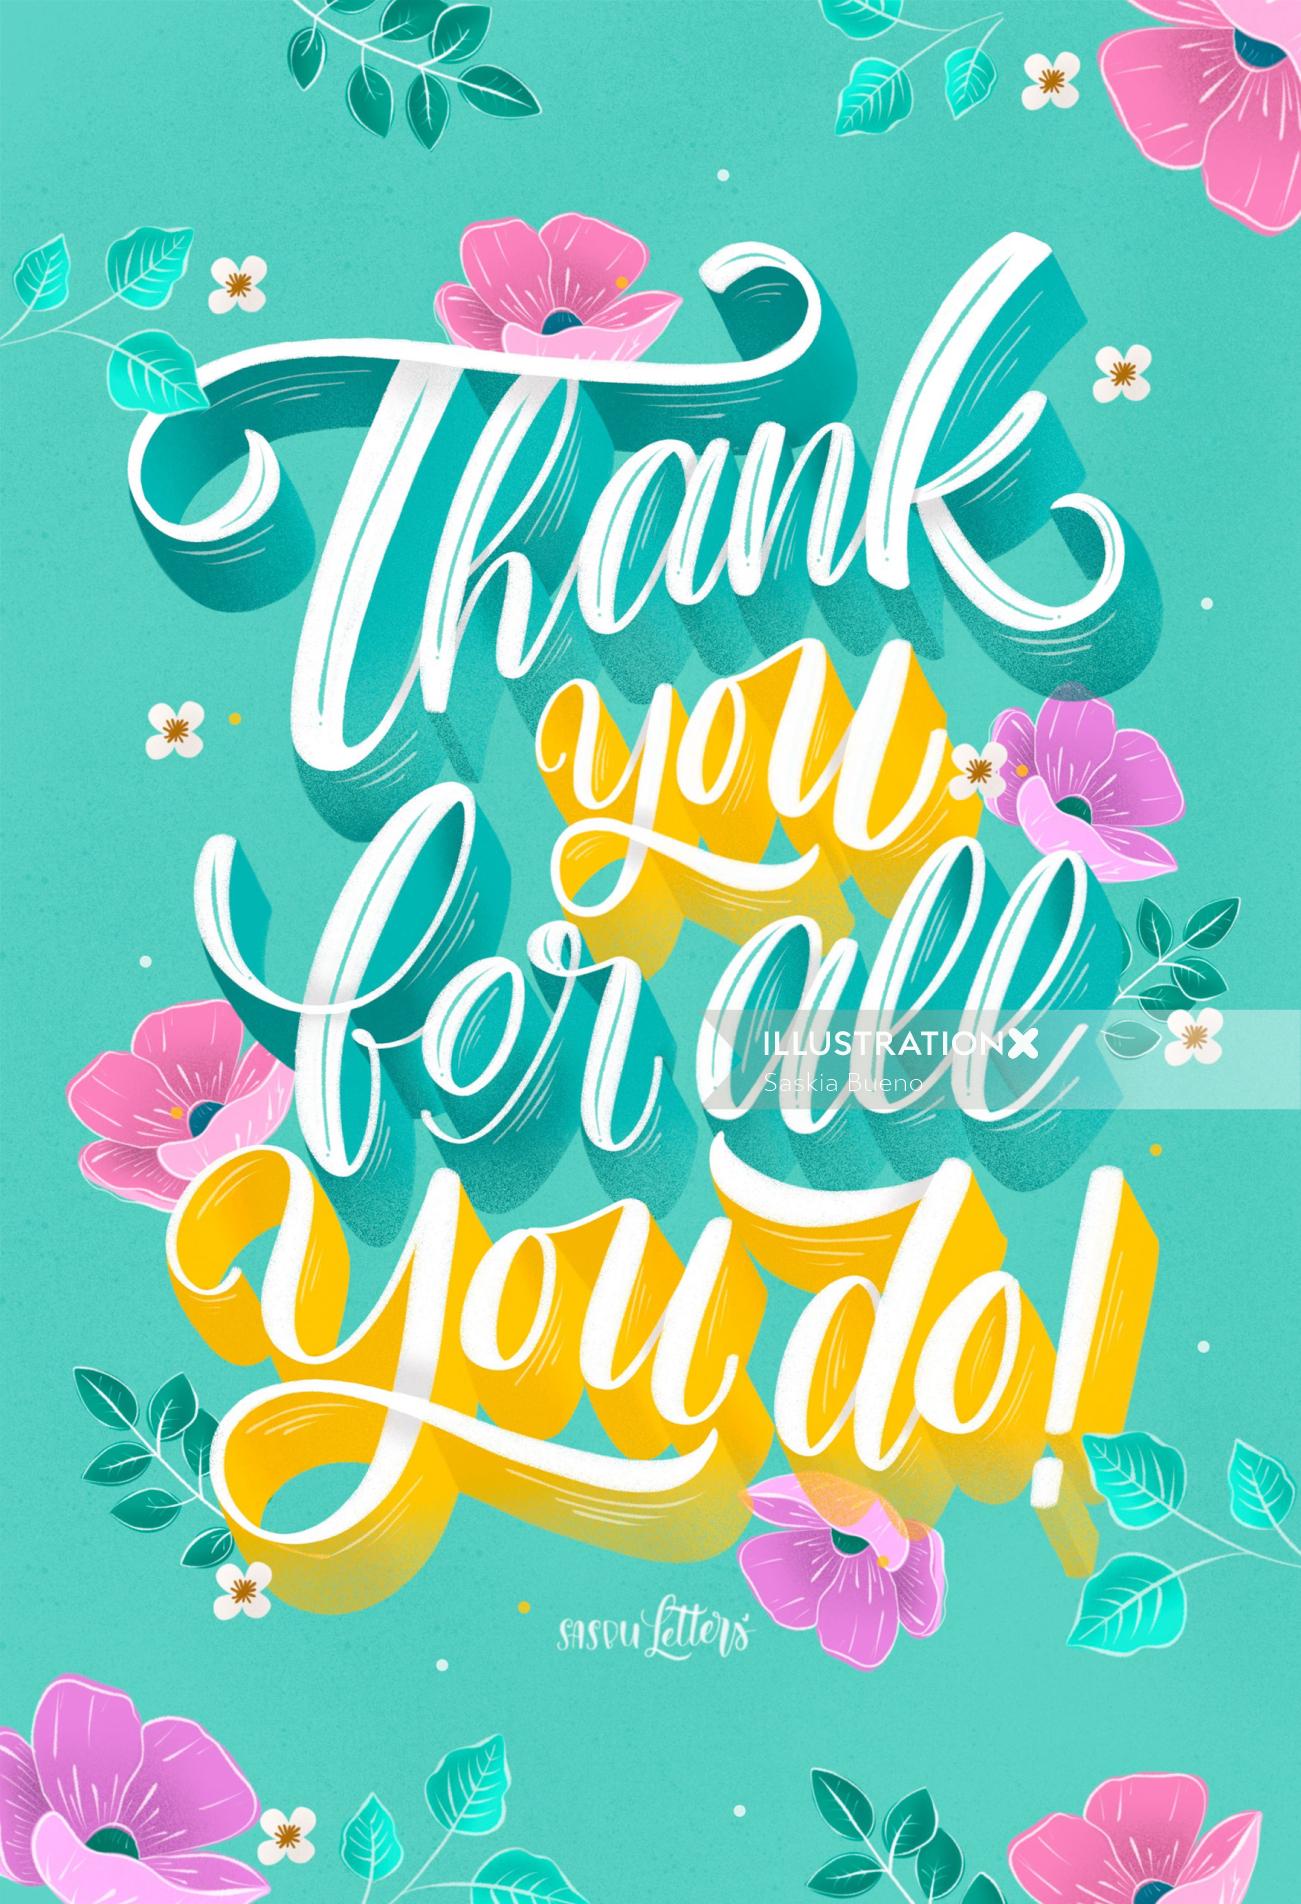 Calligraphy design of Thank You For All You Do